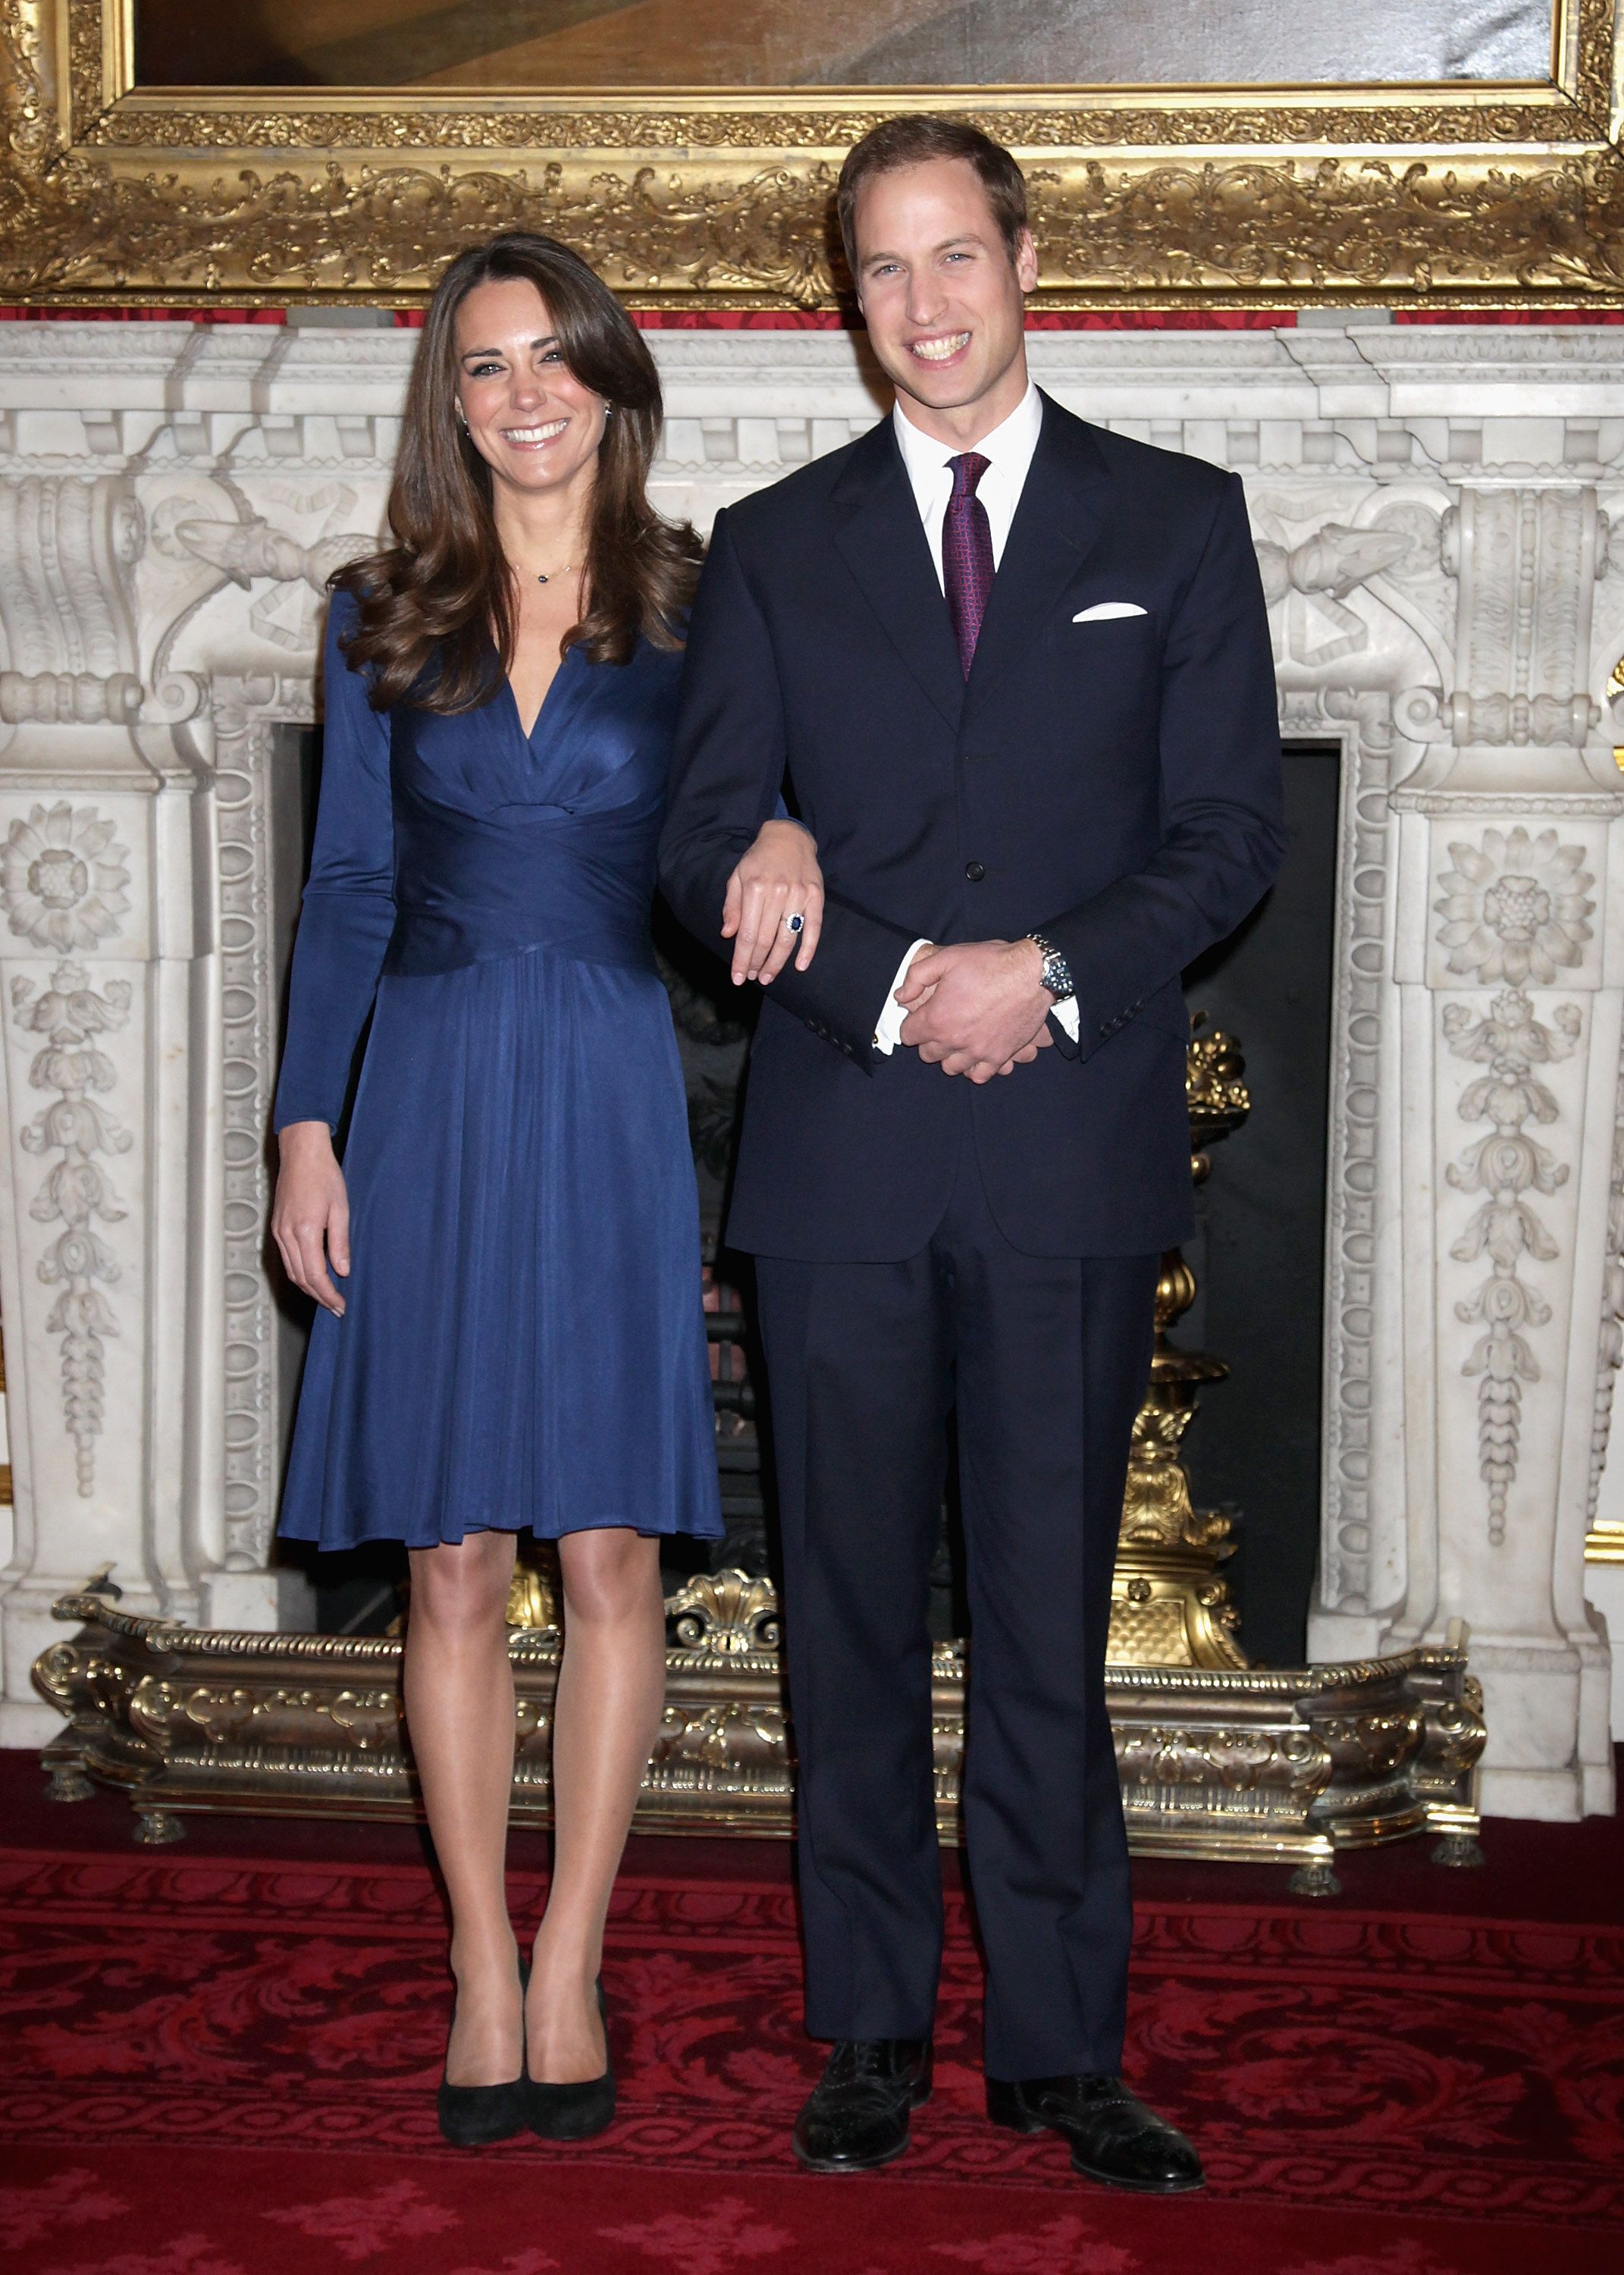 Prince William and Kate Middleton in the State Apartments of St James Palace on November 16, 2010, in London, England. | Source: Getty Images